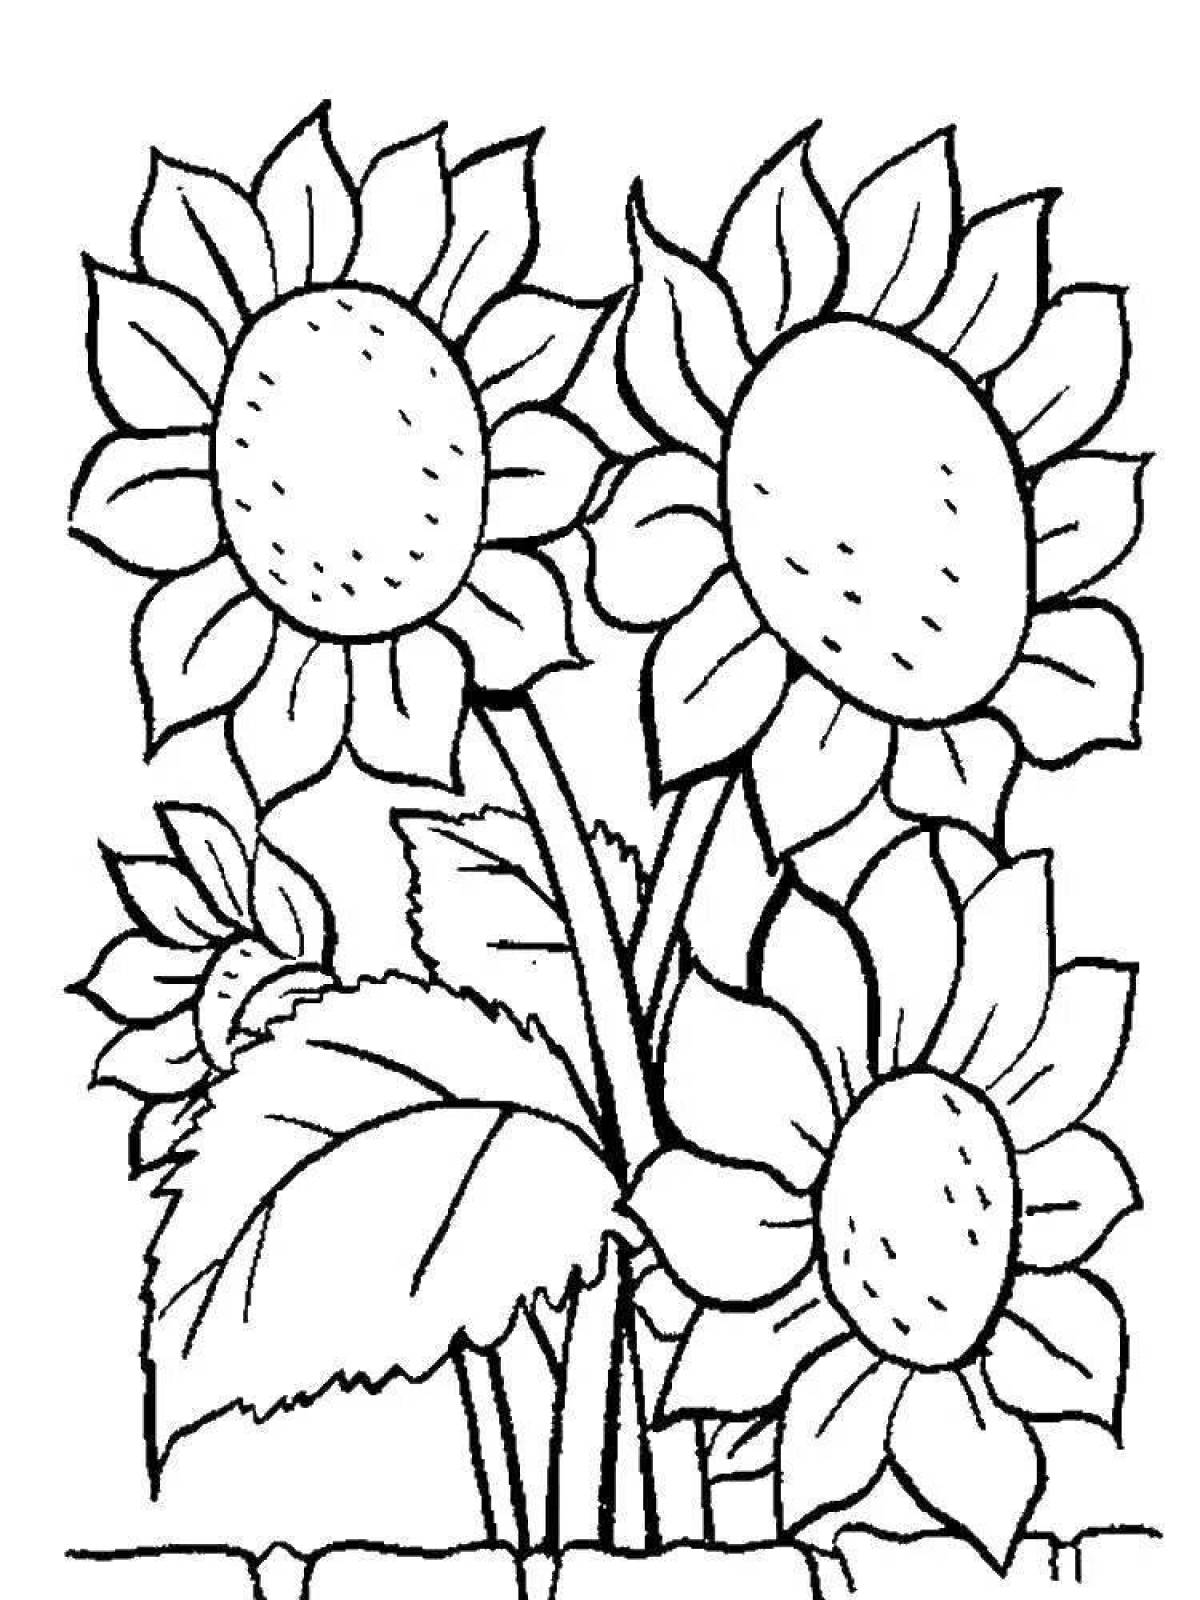 Coloring plants for children